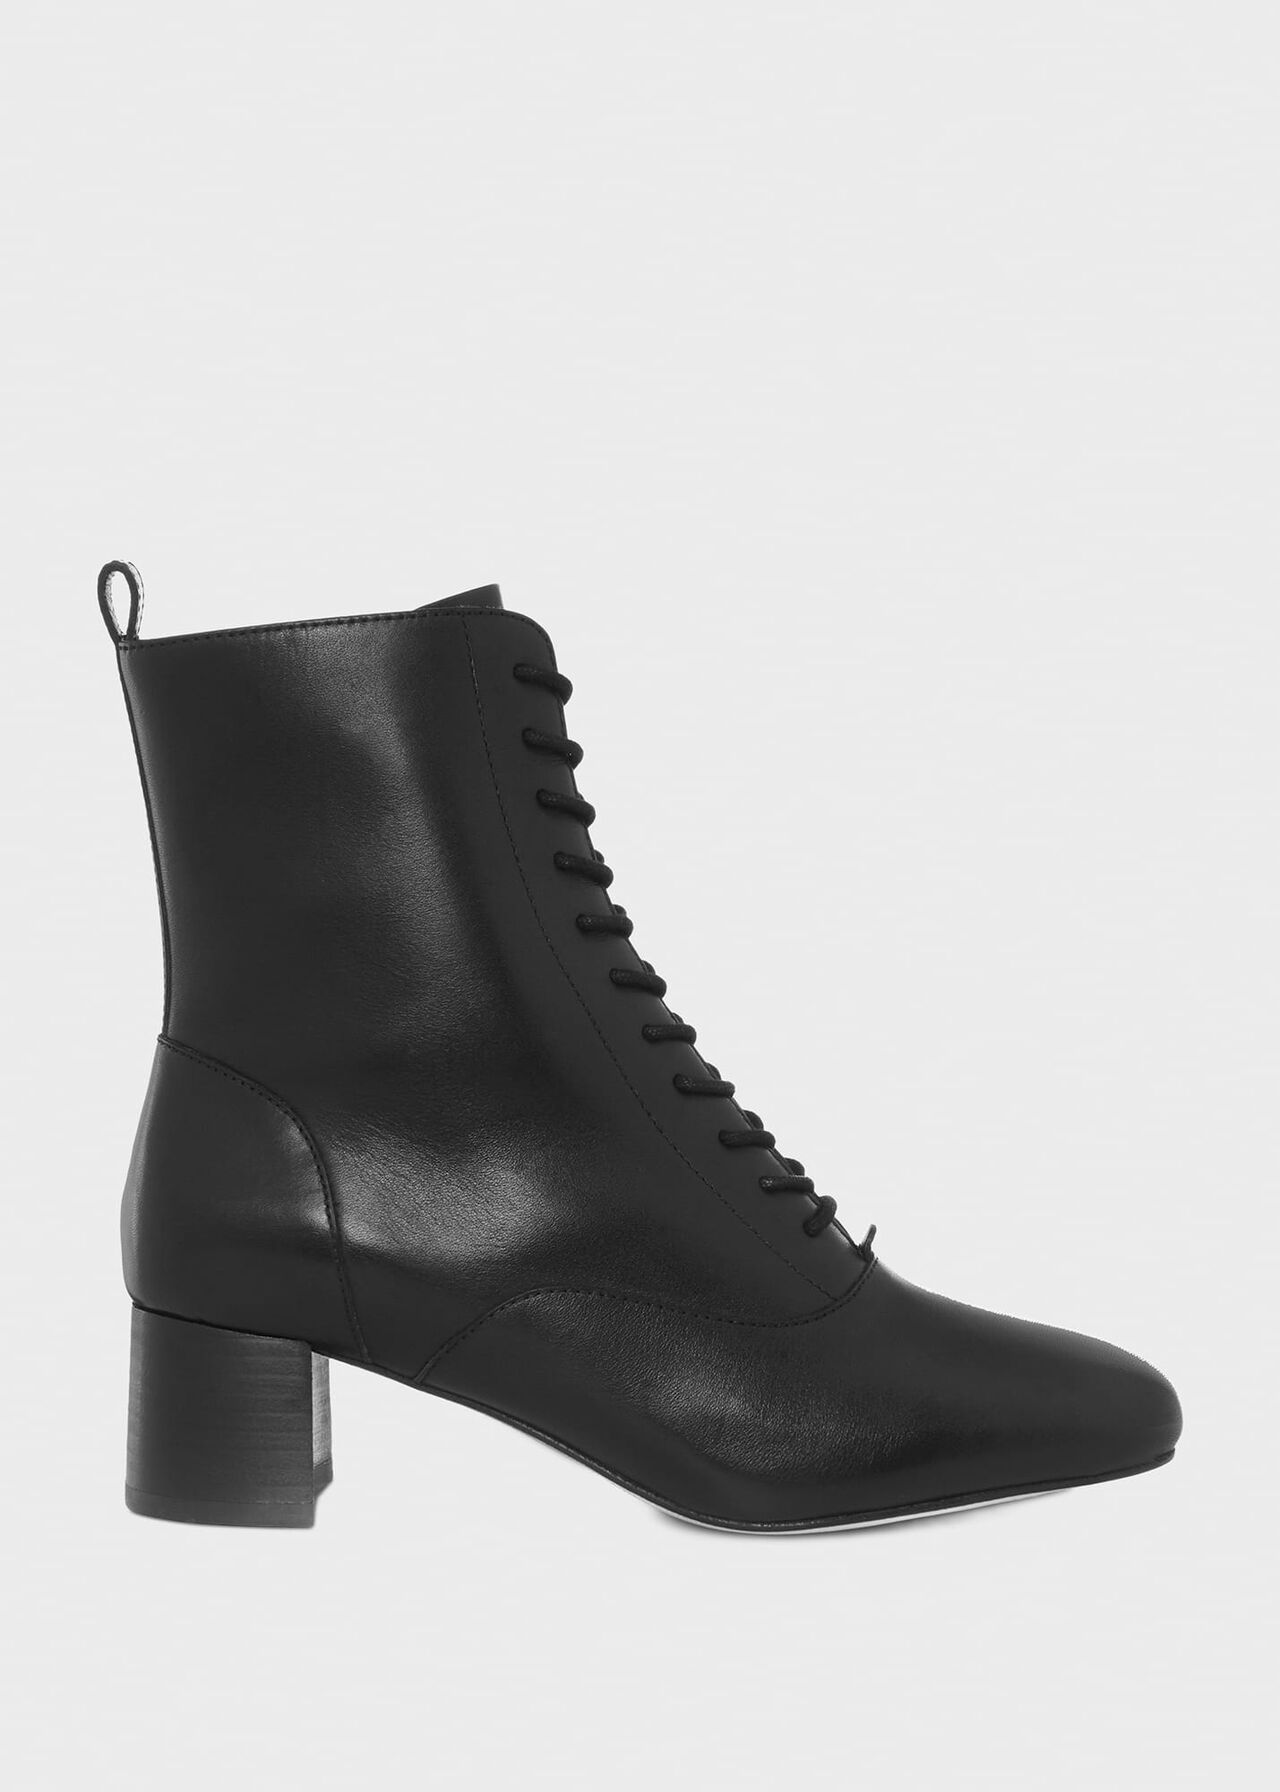 Issy Lace Up Boots, Black, hi-res